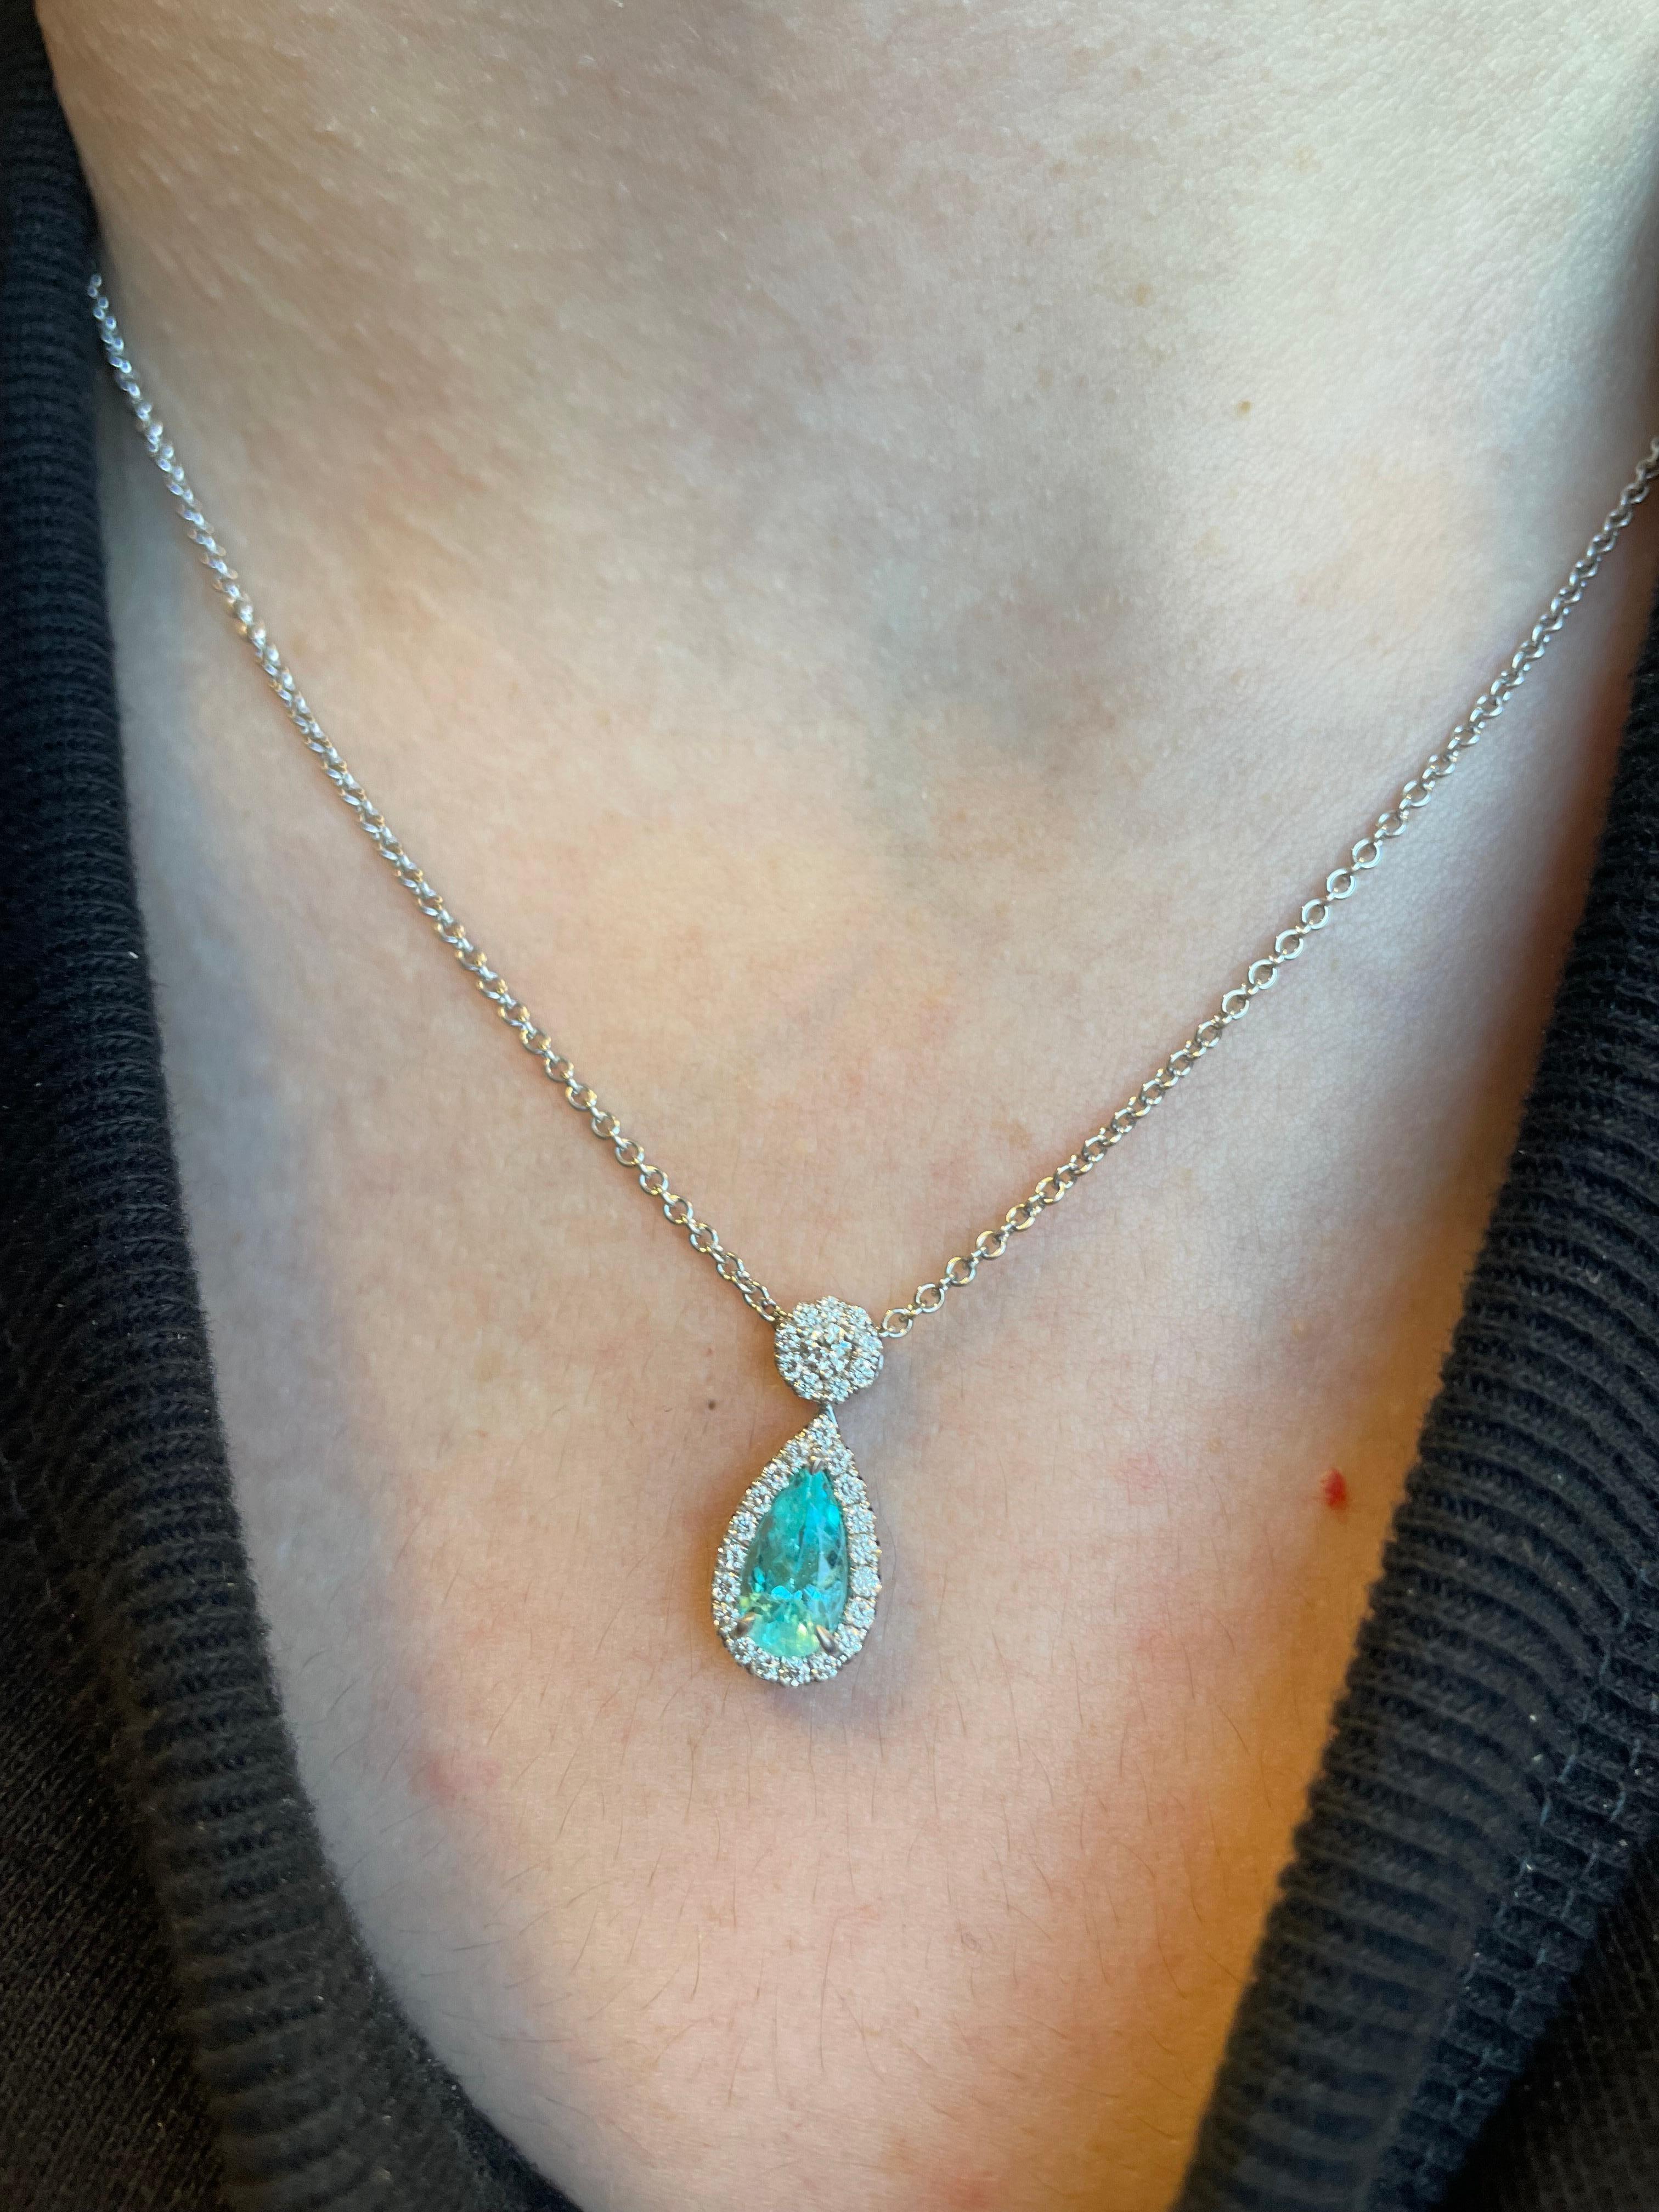 Rare Paraiba tourmaline and diamond pendant necklace, GIA certified. Created by Alexander of Beverly Hills.
1.16ct pear Paraiba tourmaline with a GIA certificate. Complimented with 0.33 carats of round brilliant diamonds. Paraiba claw set, all in